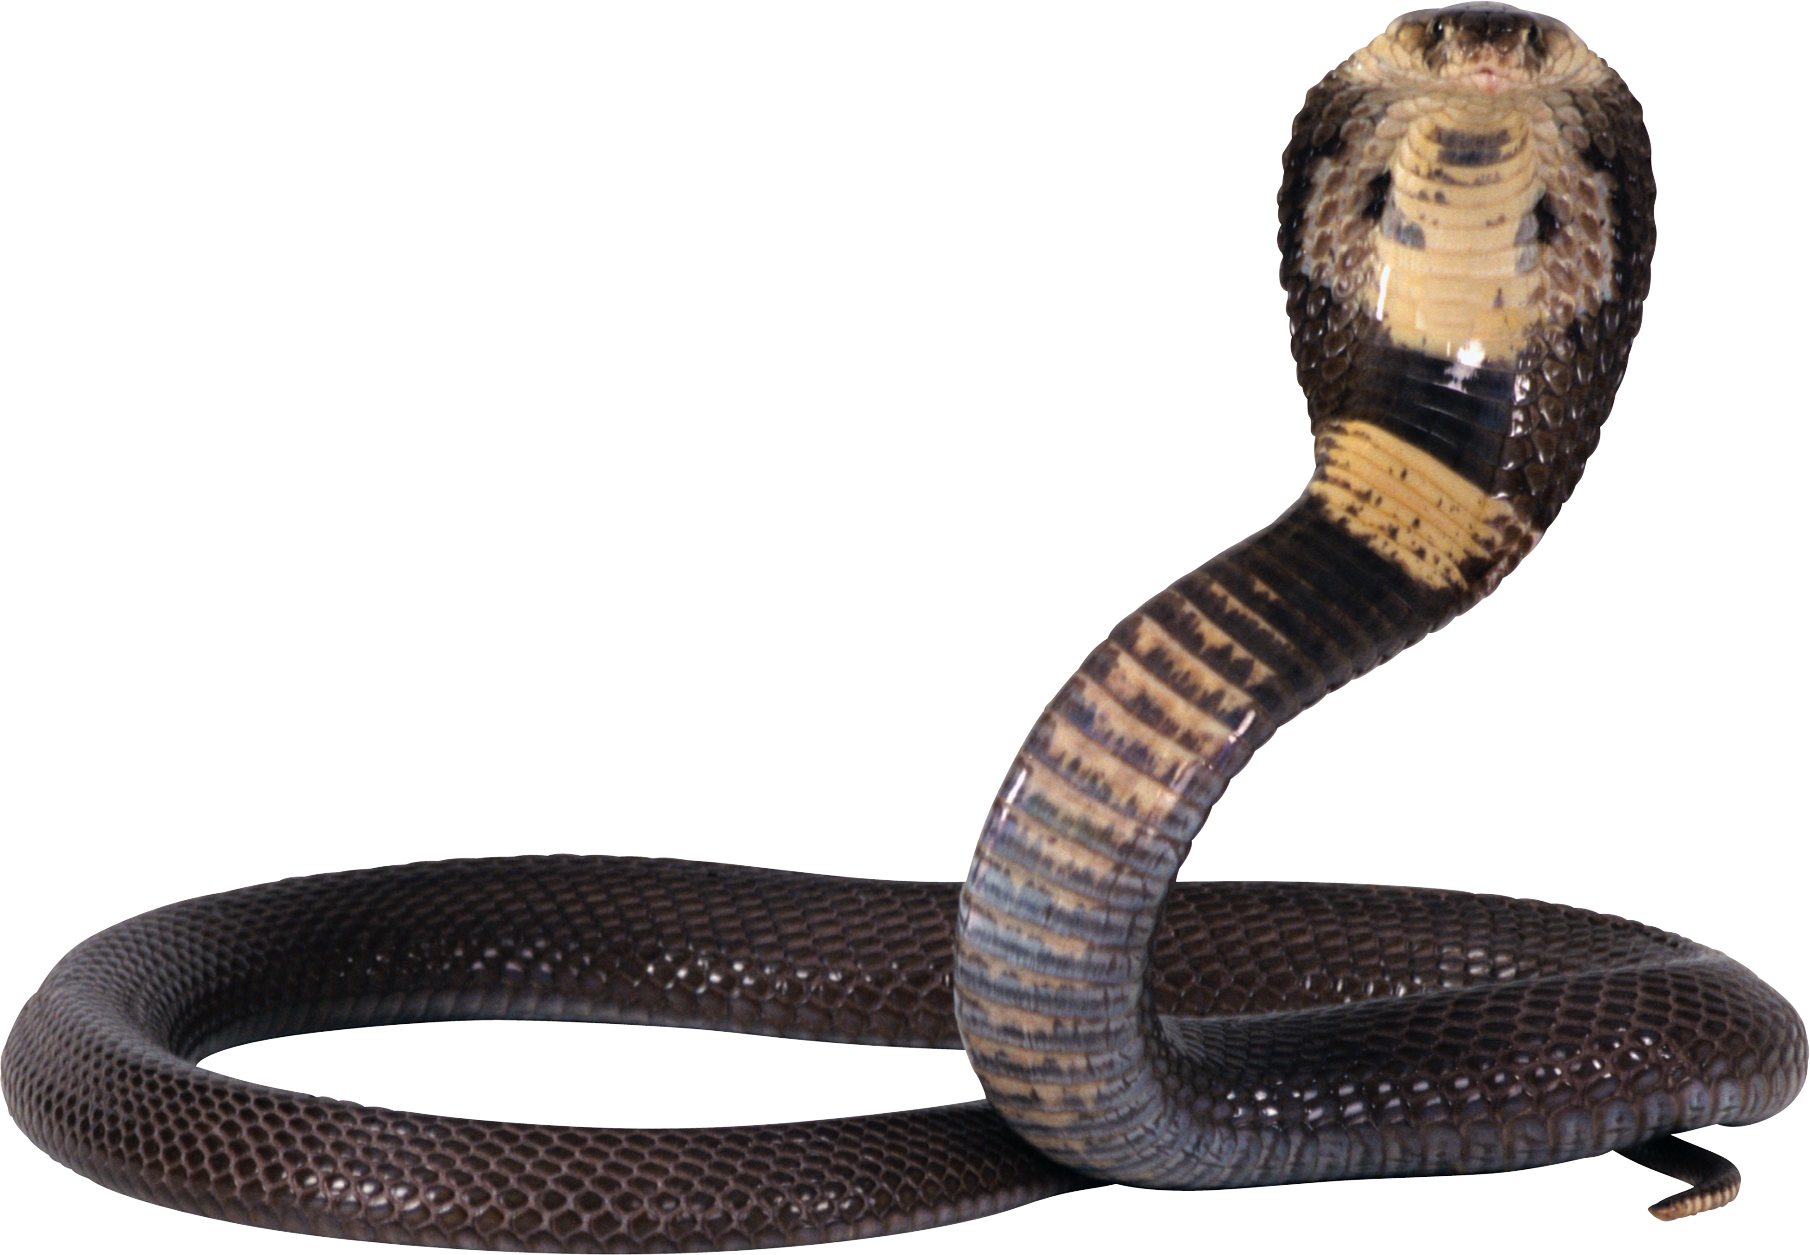 Cobra Snake Png Image, Free Download Picture - Snake, Transparent background PNG HD thumbnail